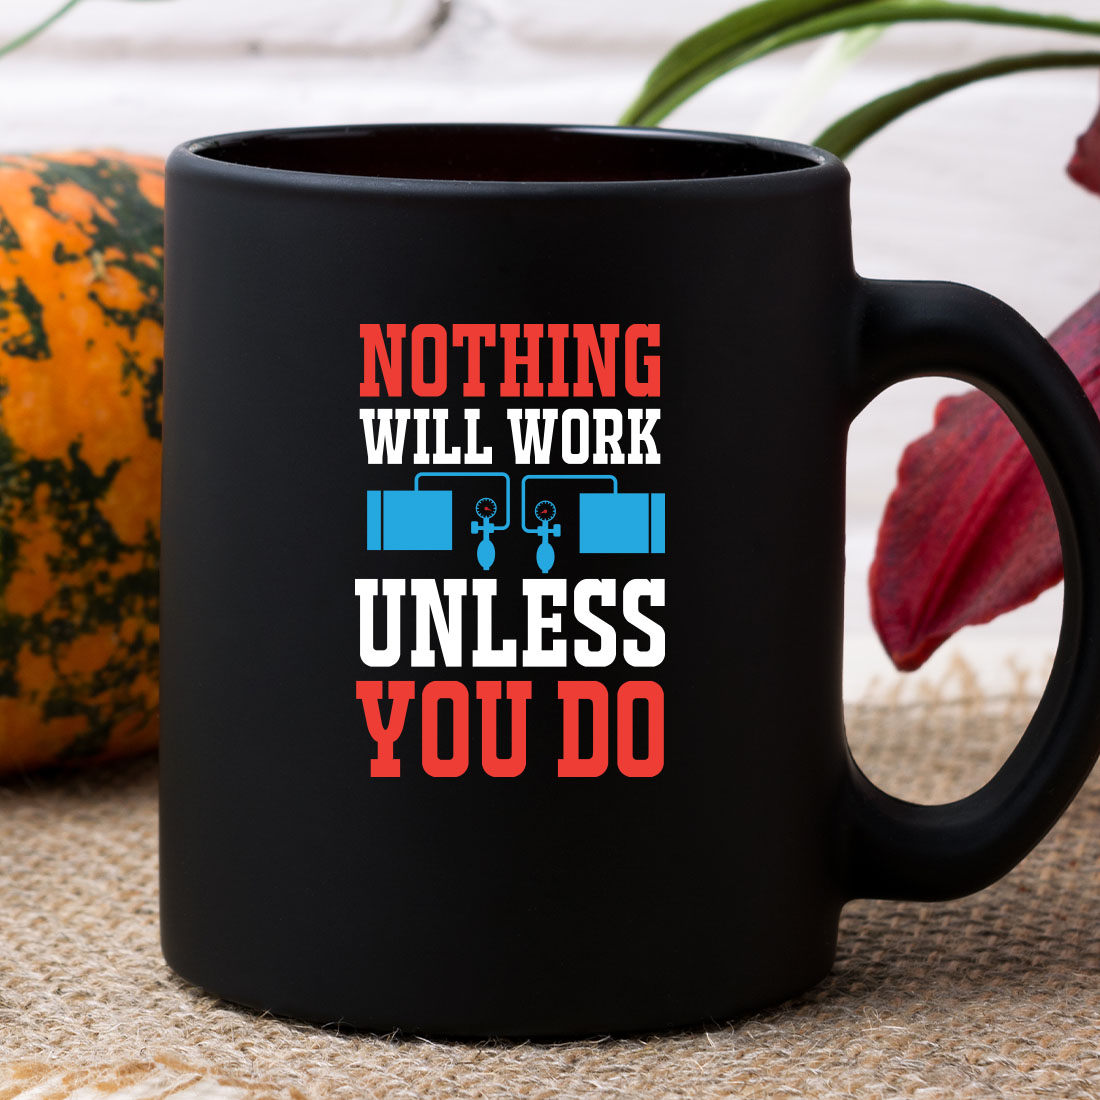 Black coffee mug that says nothing will work unless you do.